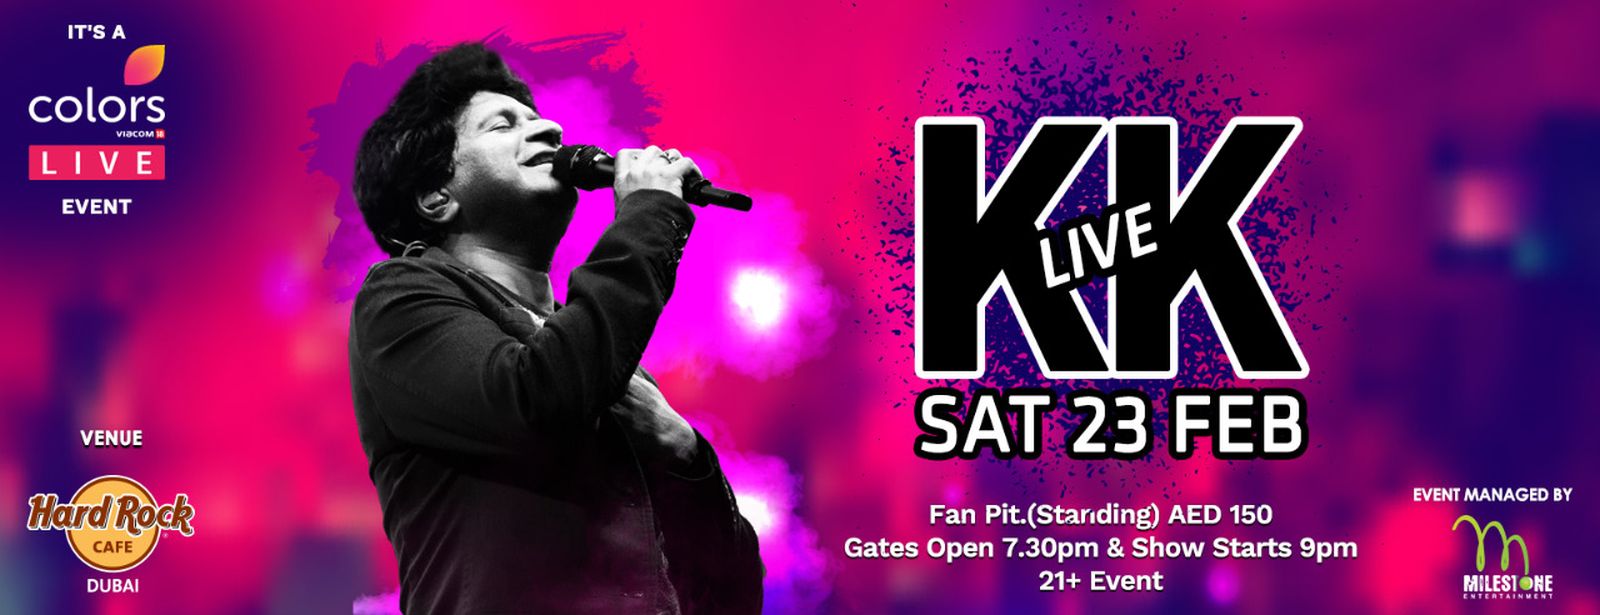 KK Live at the Hard Rock Cafe - Coming Soon in UAE